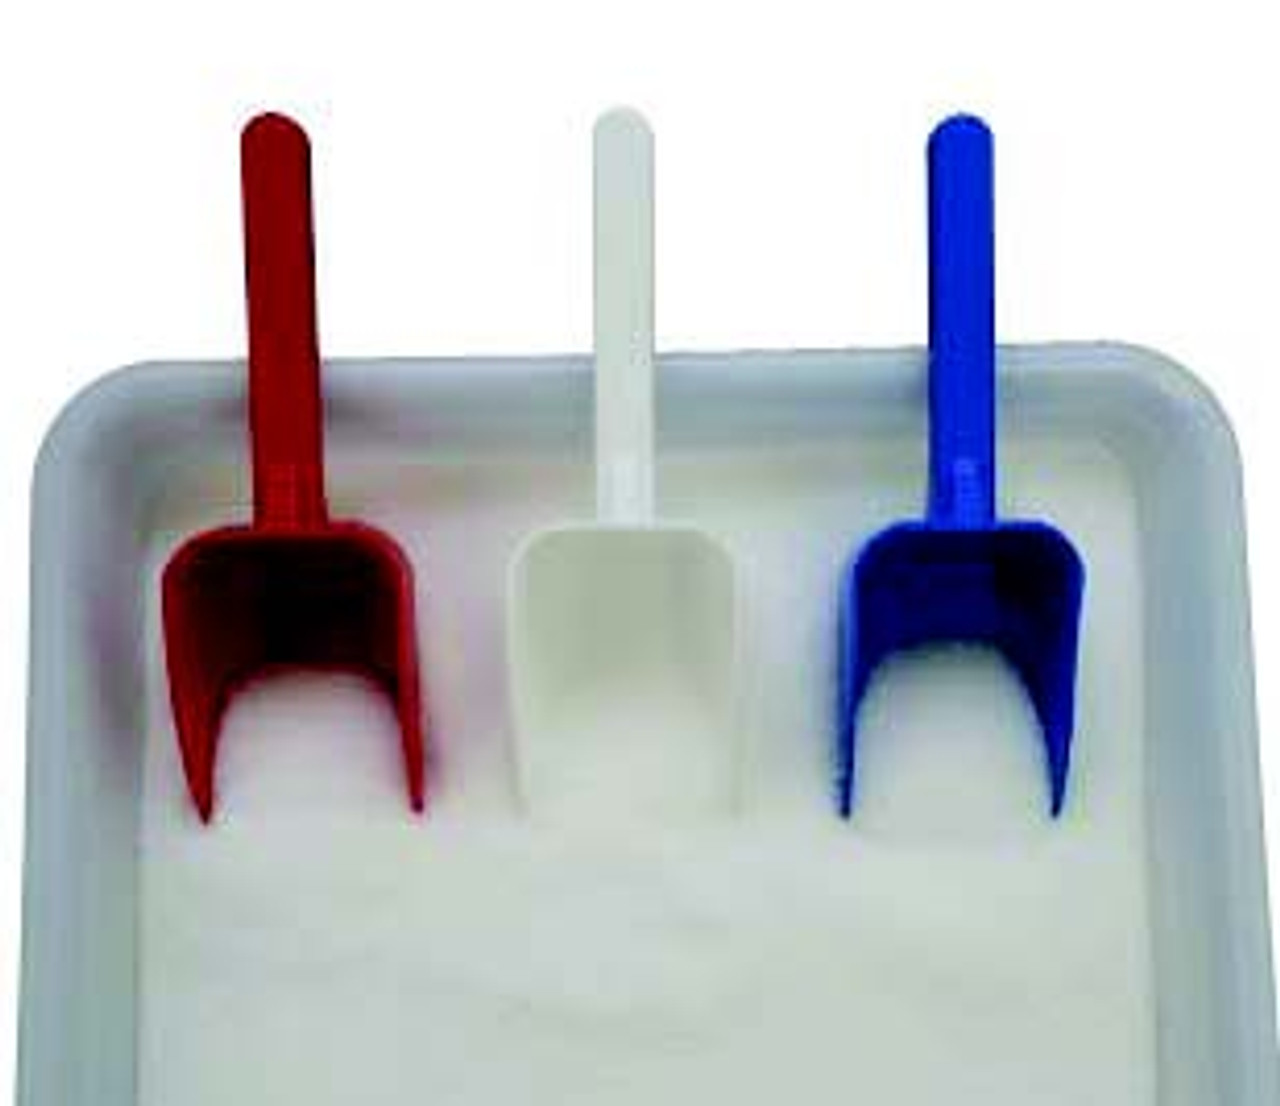 Available in assorted colors.
Brightly colored scoops are easy to spot.